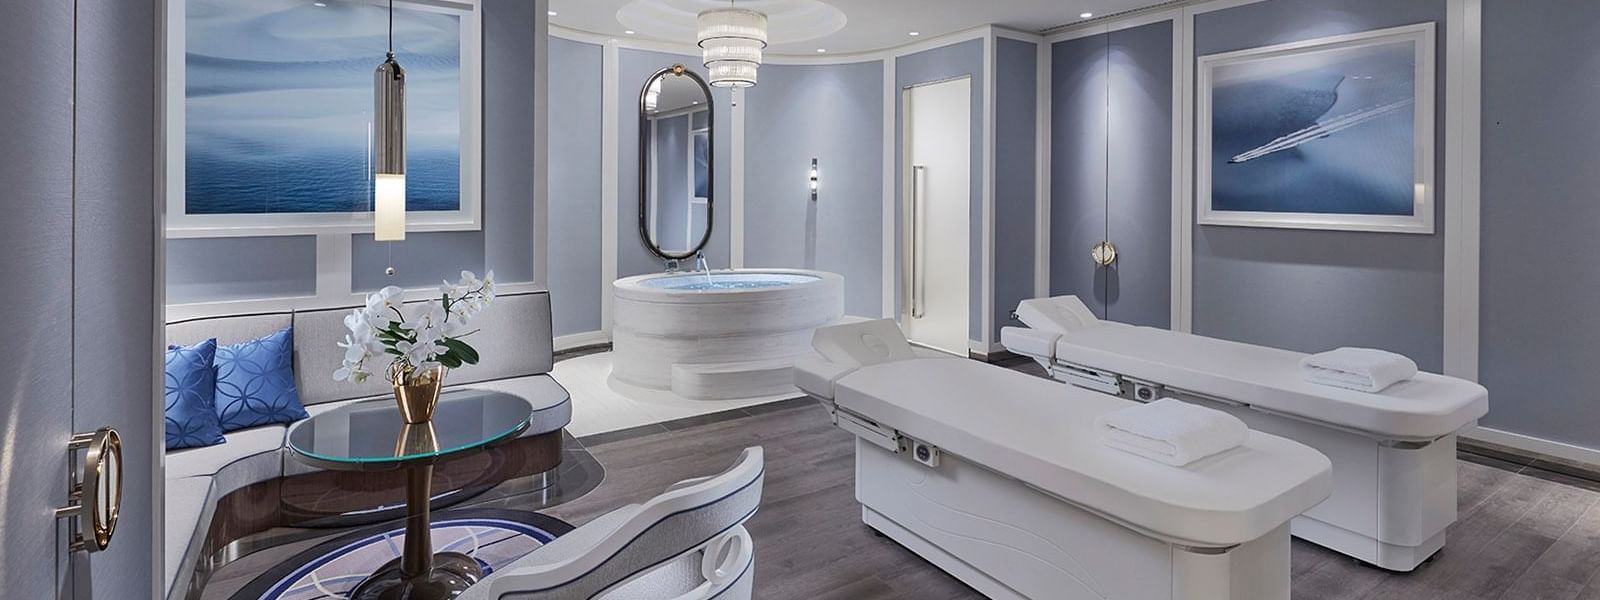 Bathtub & treatment beds in Spa center at Crown Hotel Perth